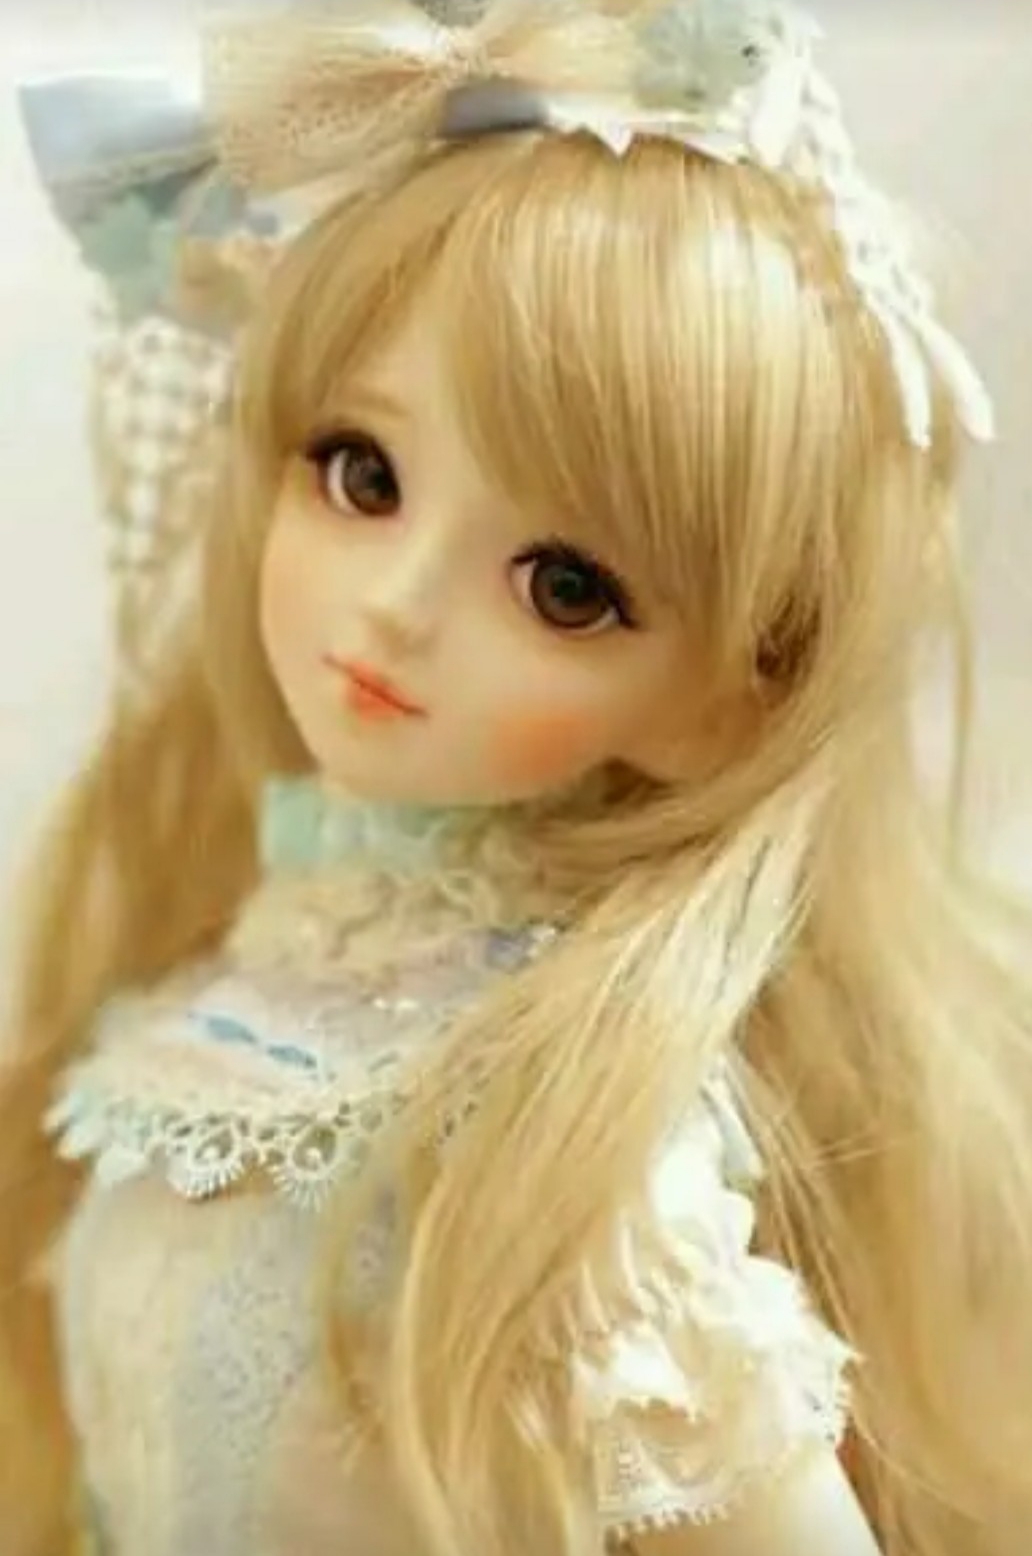 35 Very Cute Barbie Doll Images, Pictures, Wallpapers For Whatsapp Dp, Fb